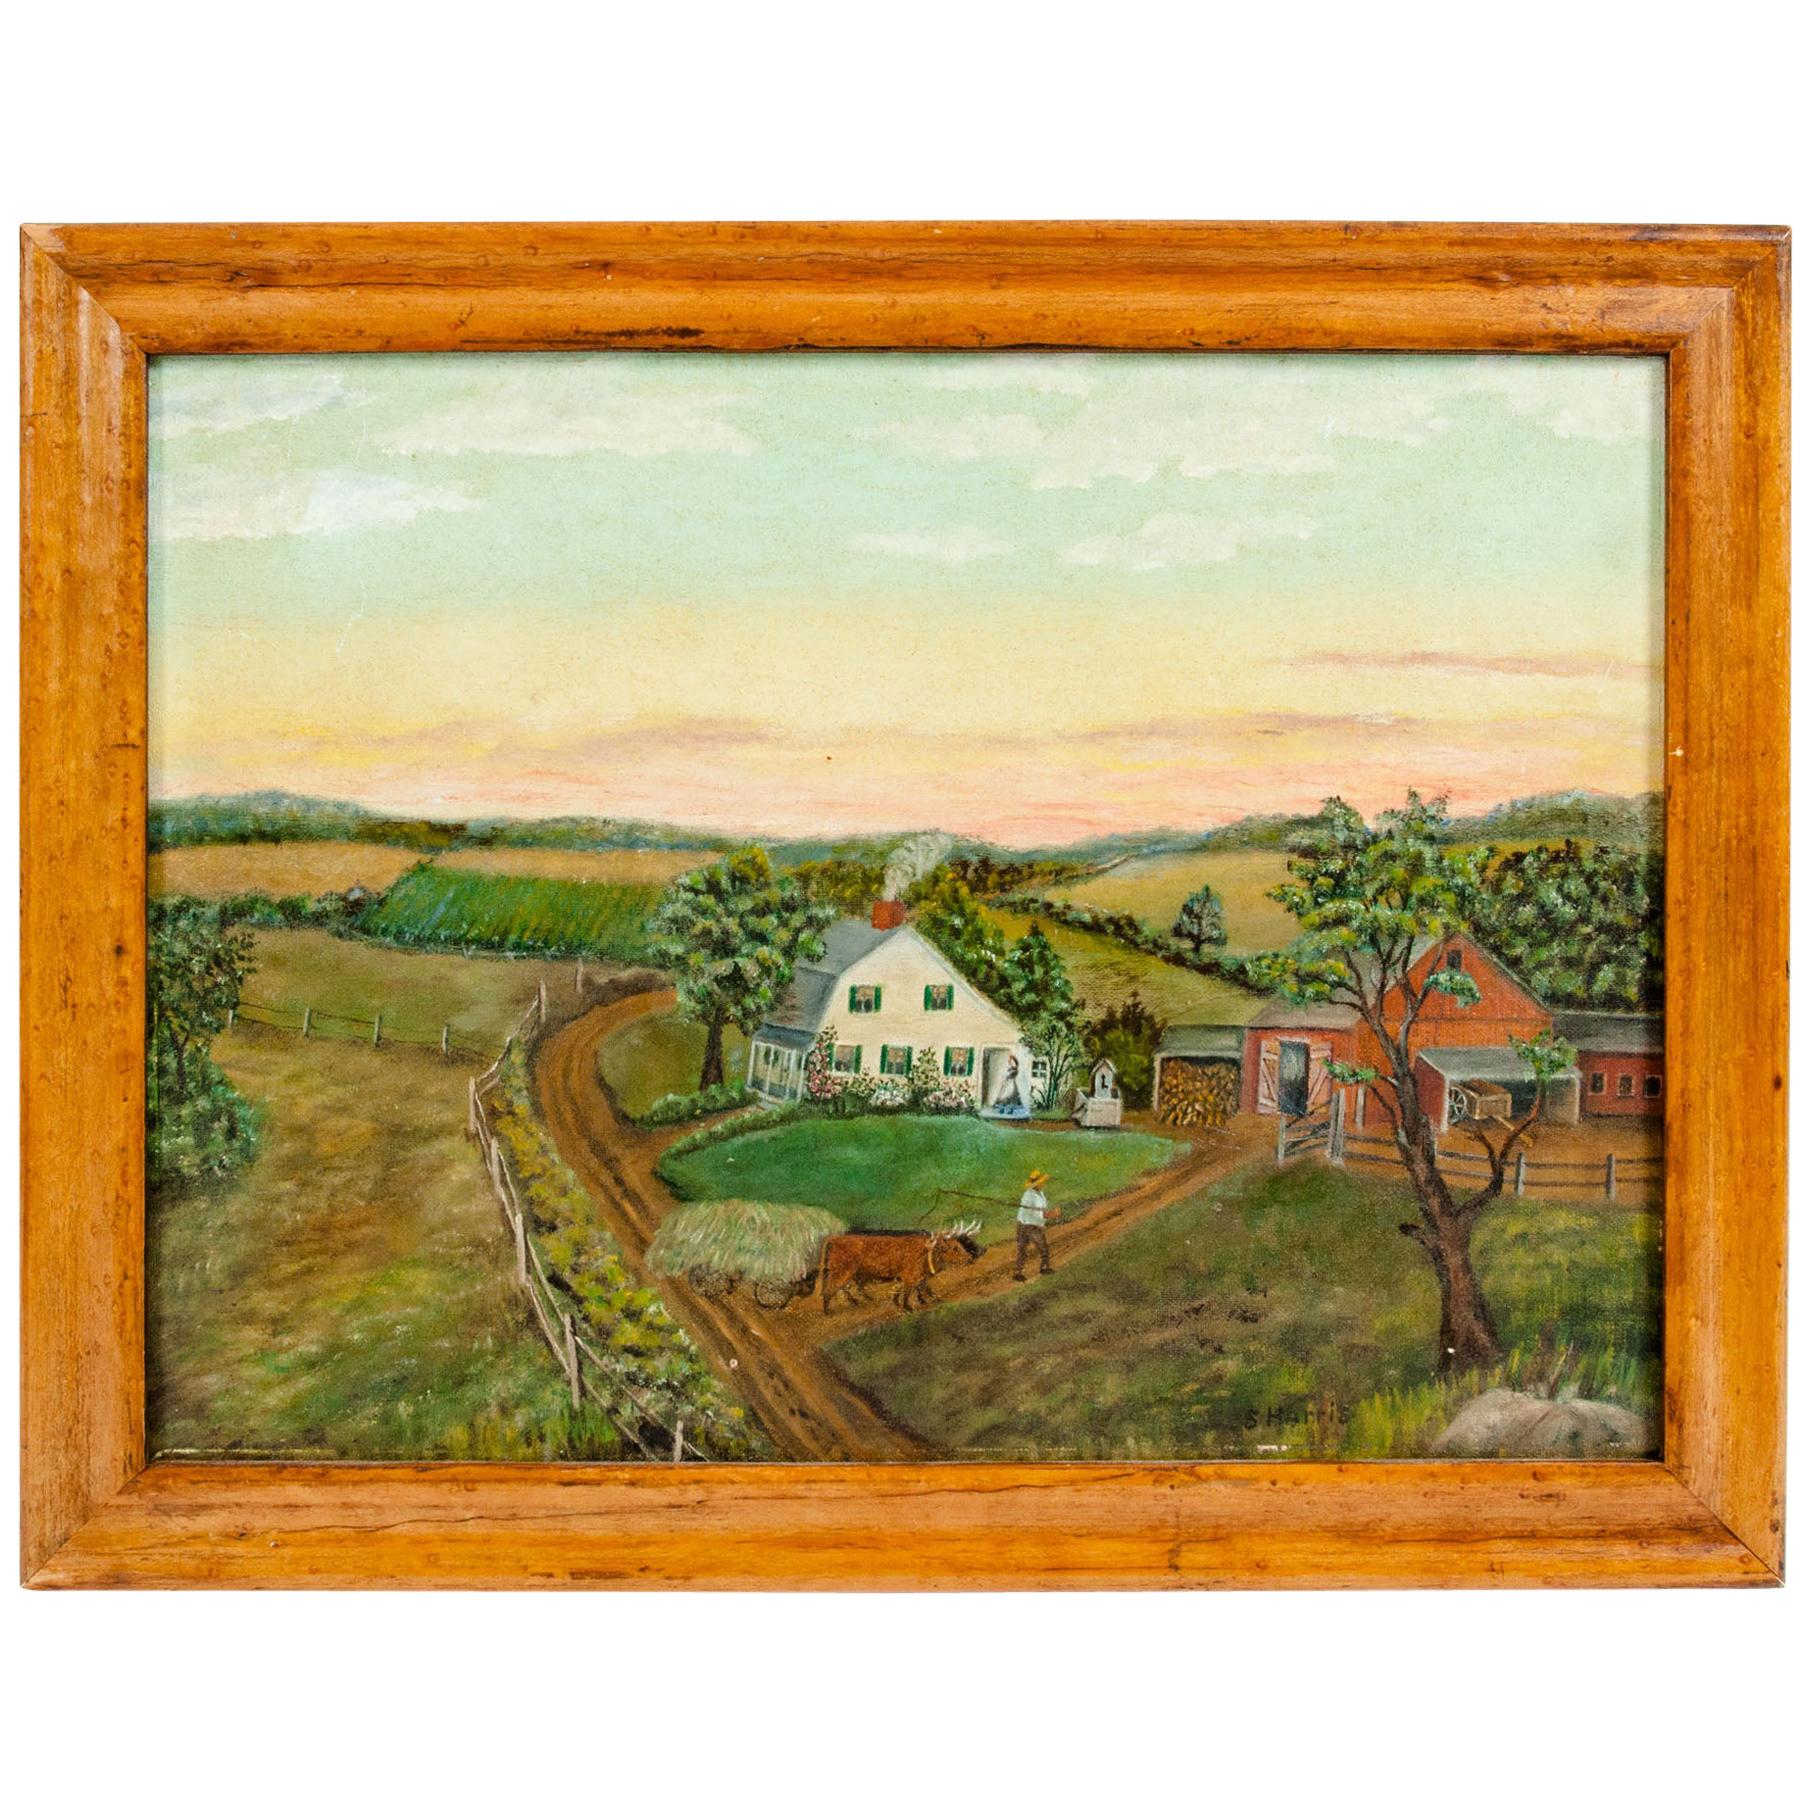 Wood Frame Mid-20th Century Oil / Board Painting